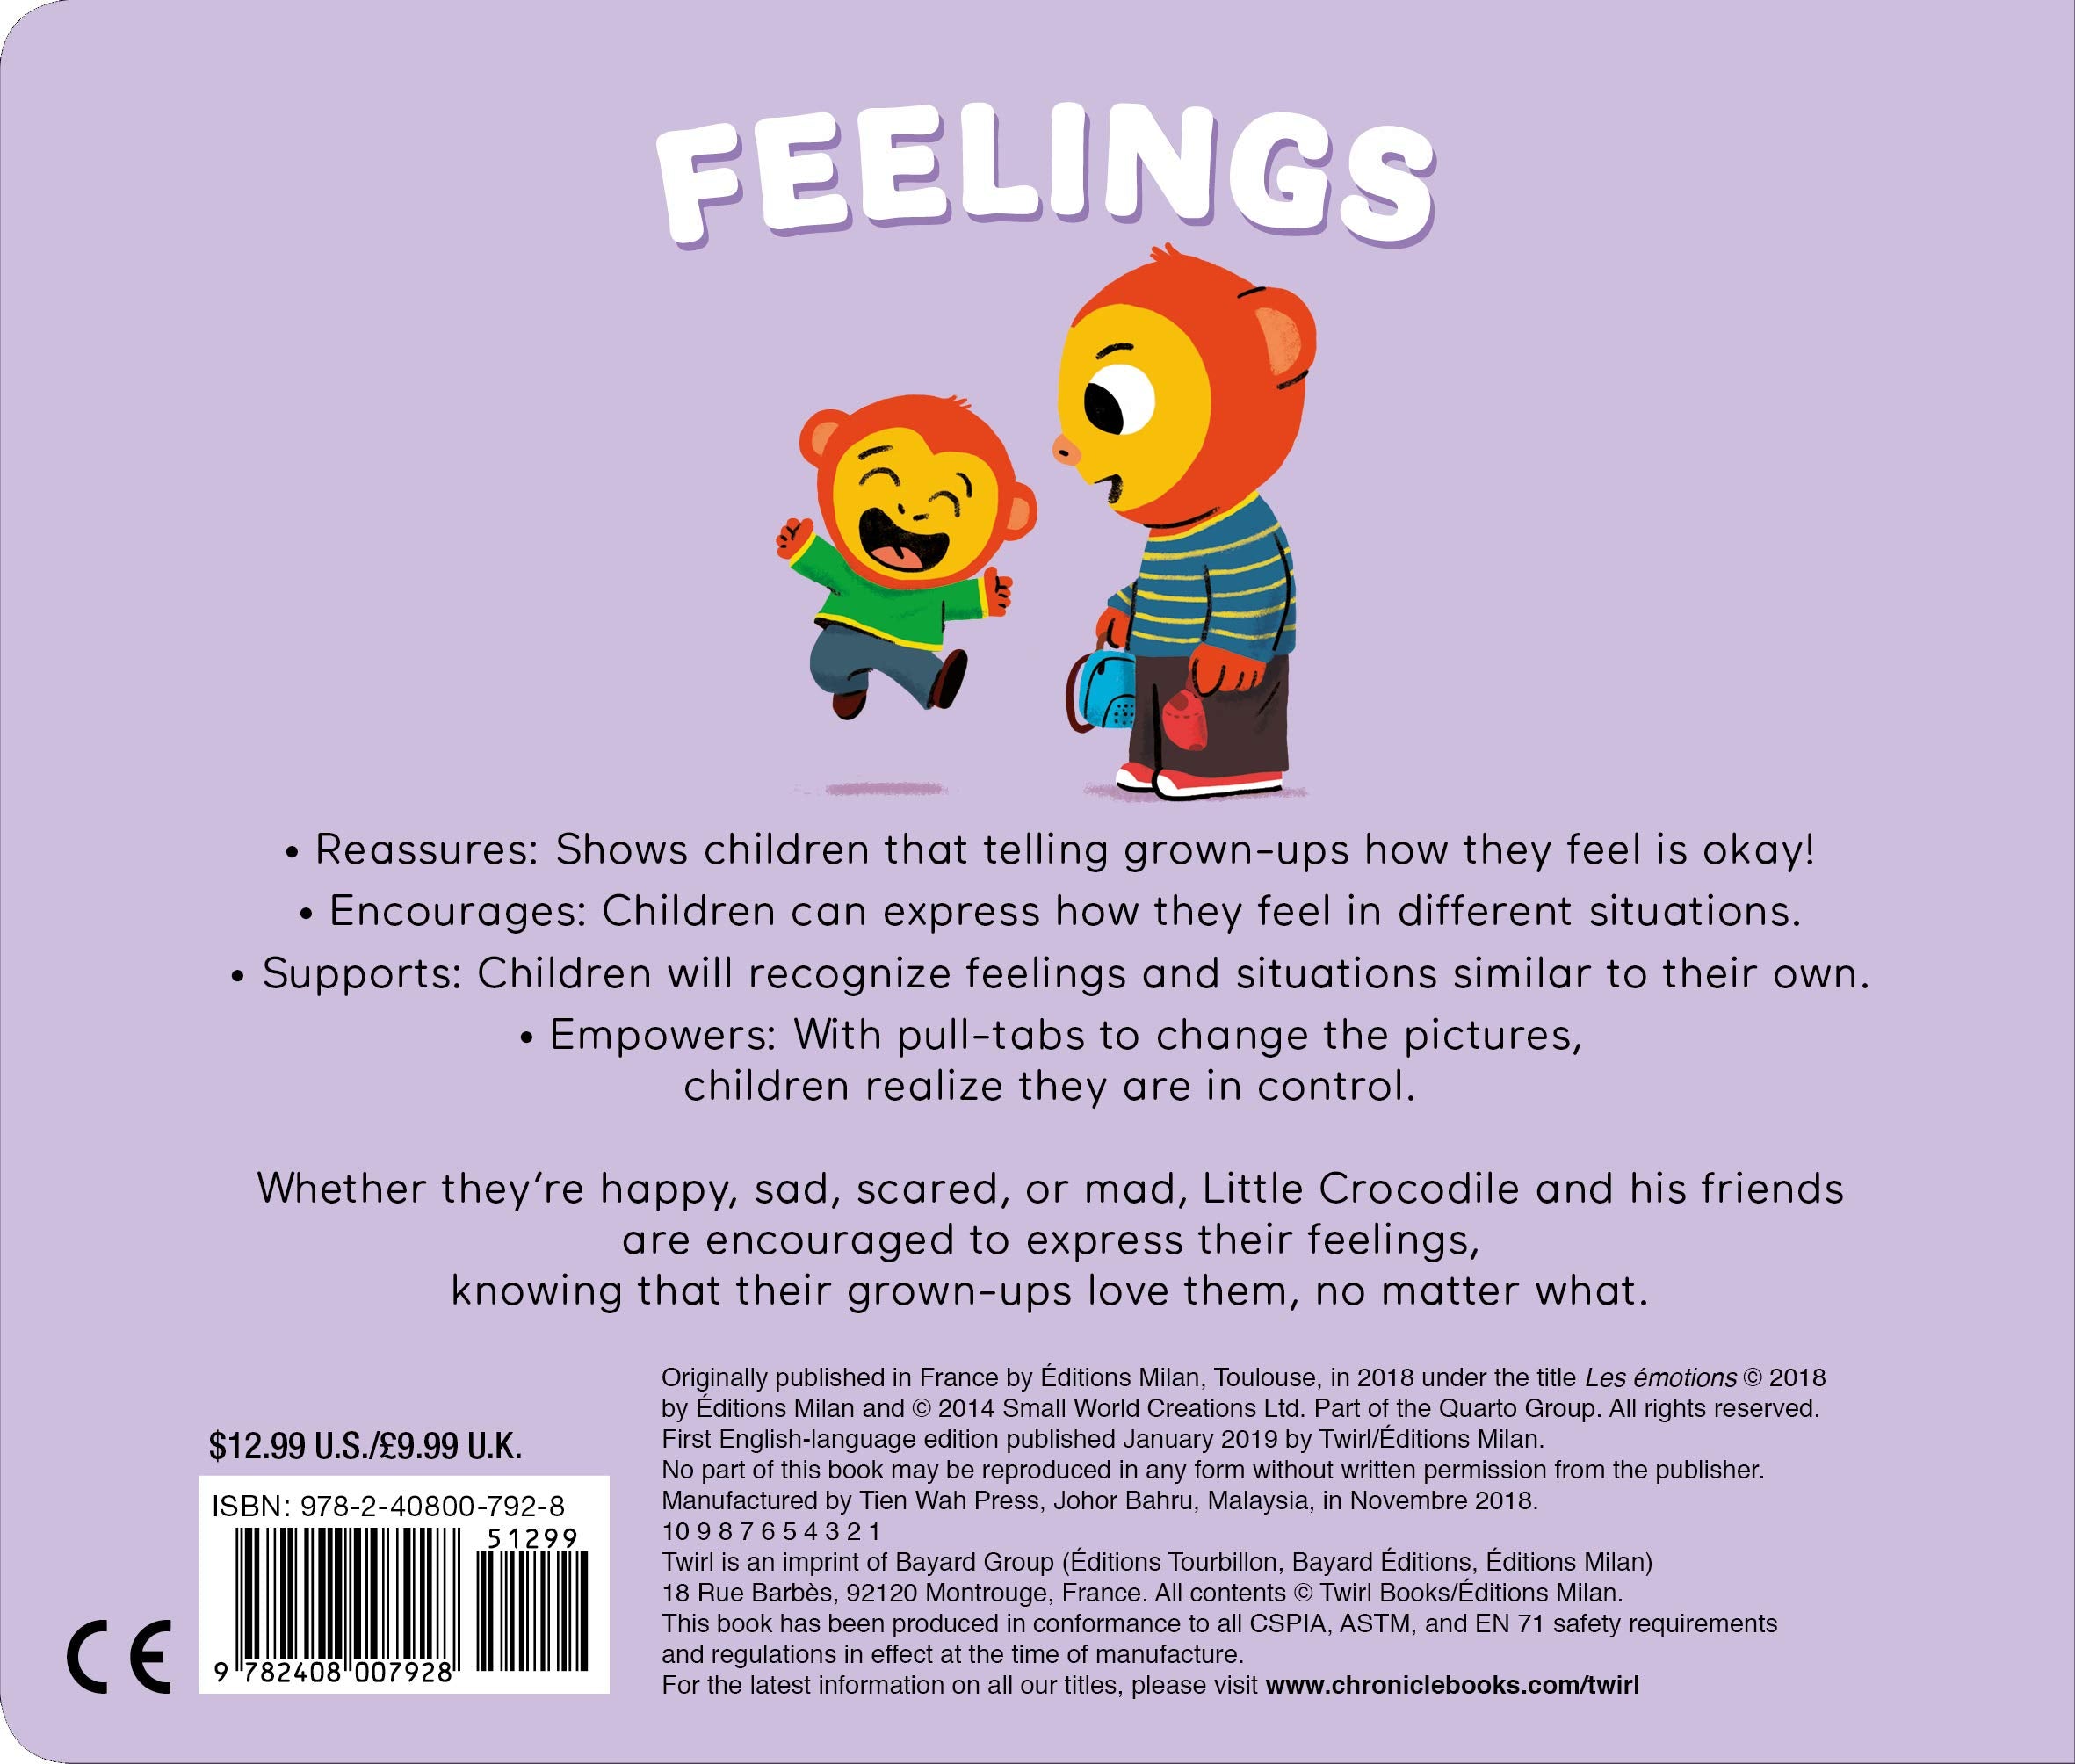 Pull and Play Books : Feelings